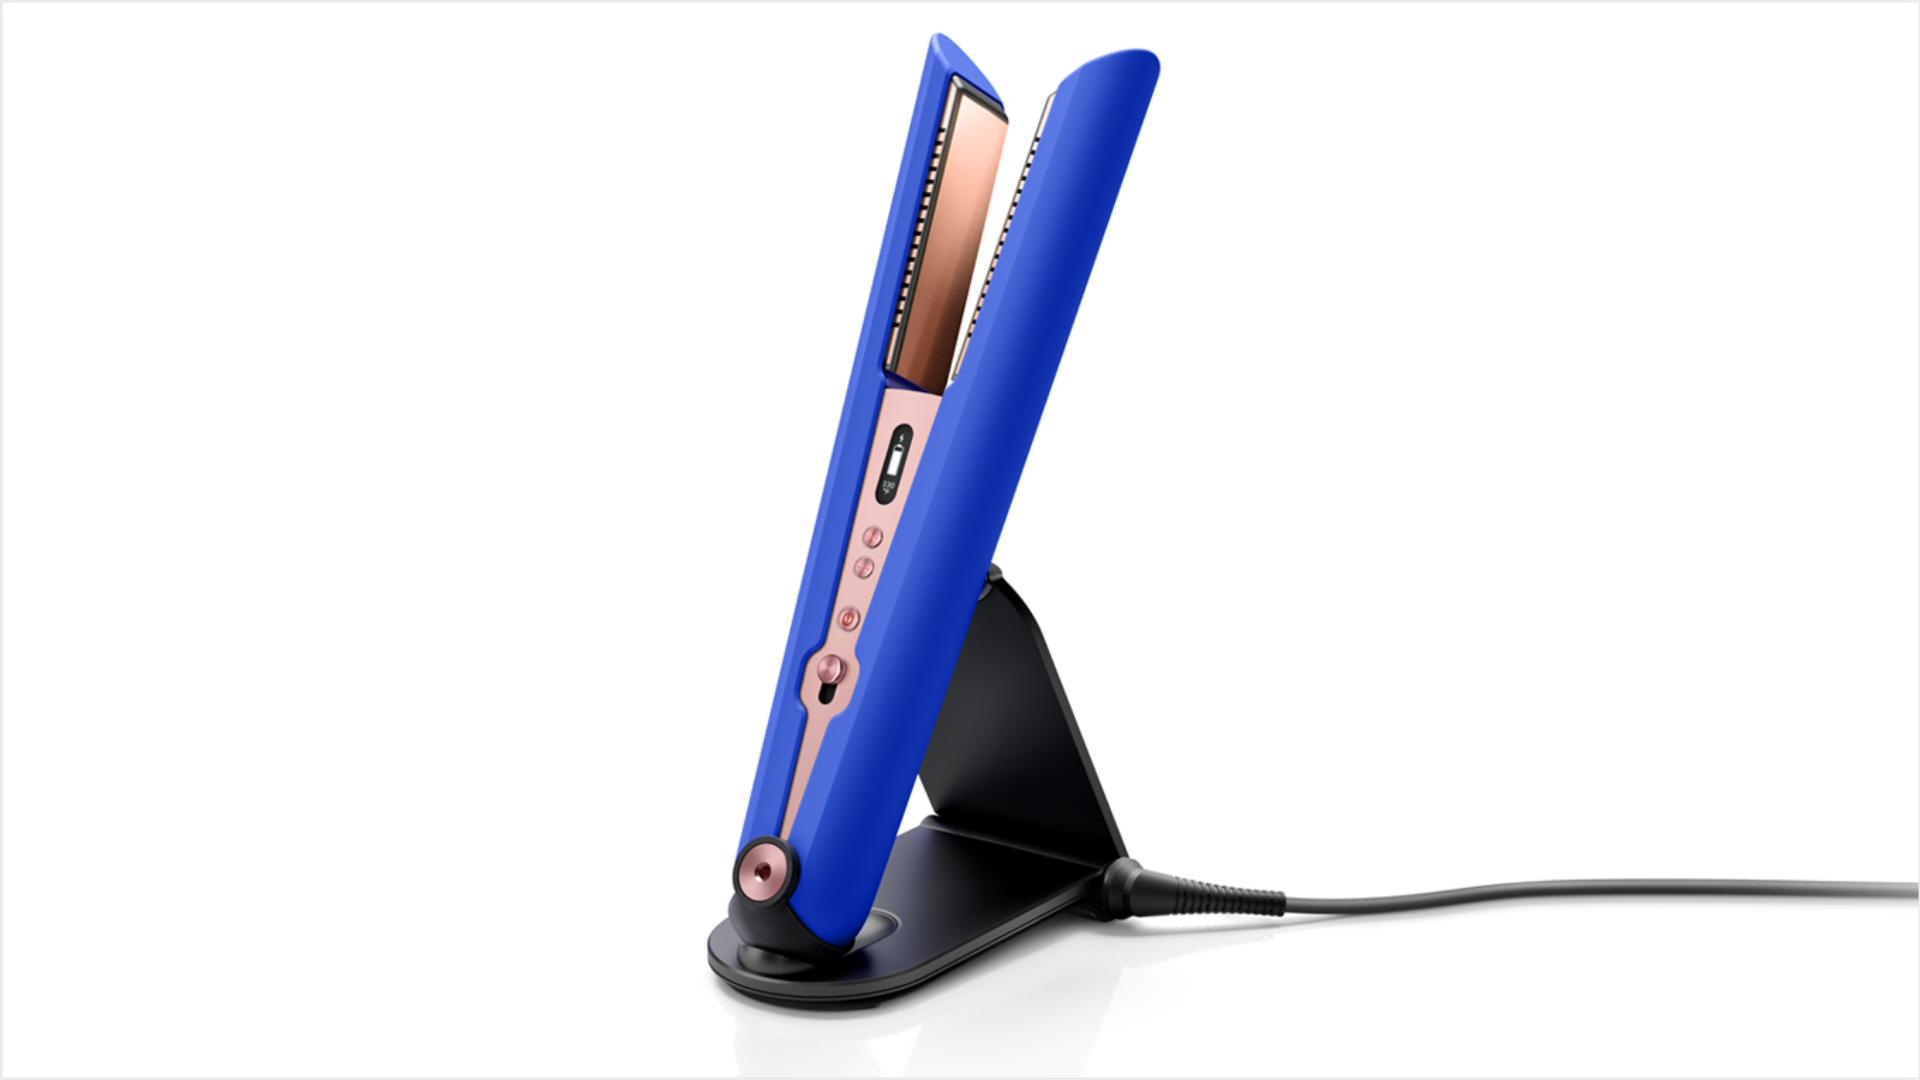 The Dyson Corrale straightener in its charging dock